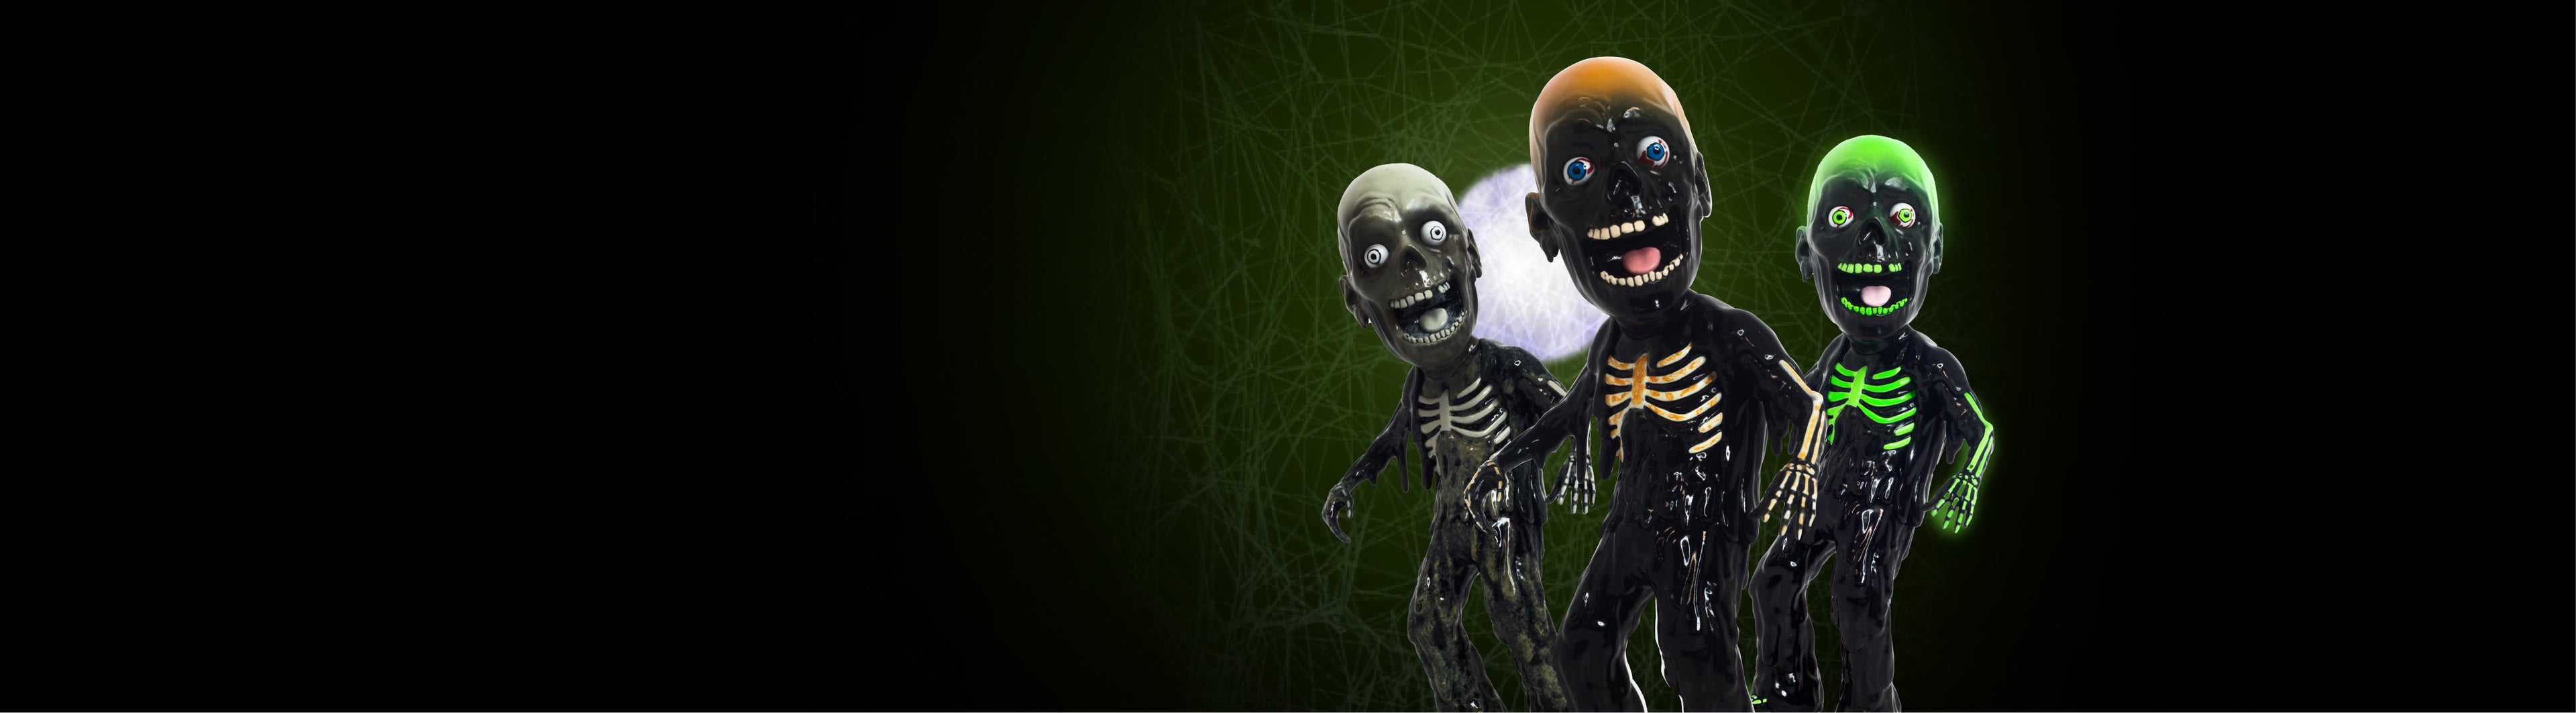 Three Tarman Bigheadz figures in normal, black & white, and green glow-in-the-dark colors, set against a dark green background with a full white moon. 